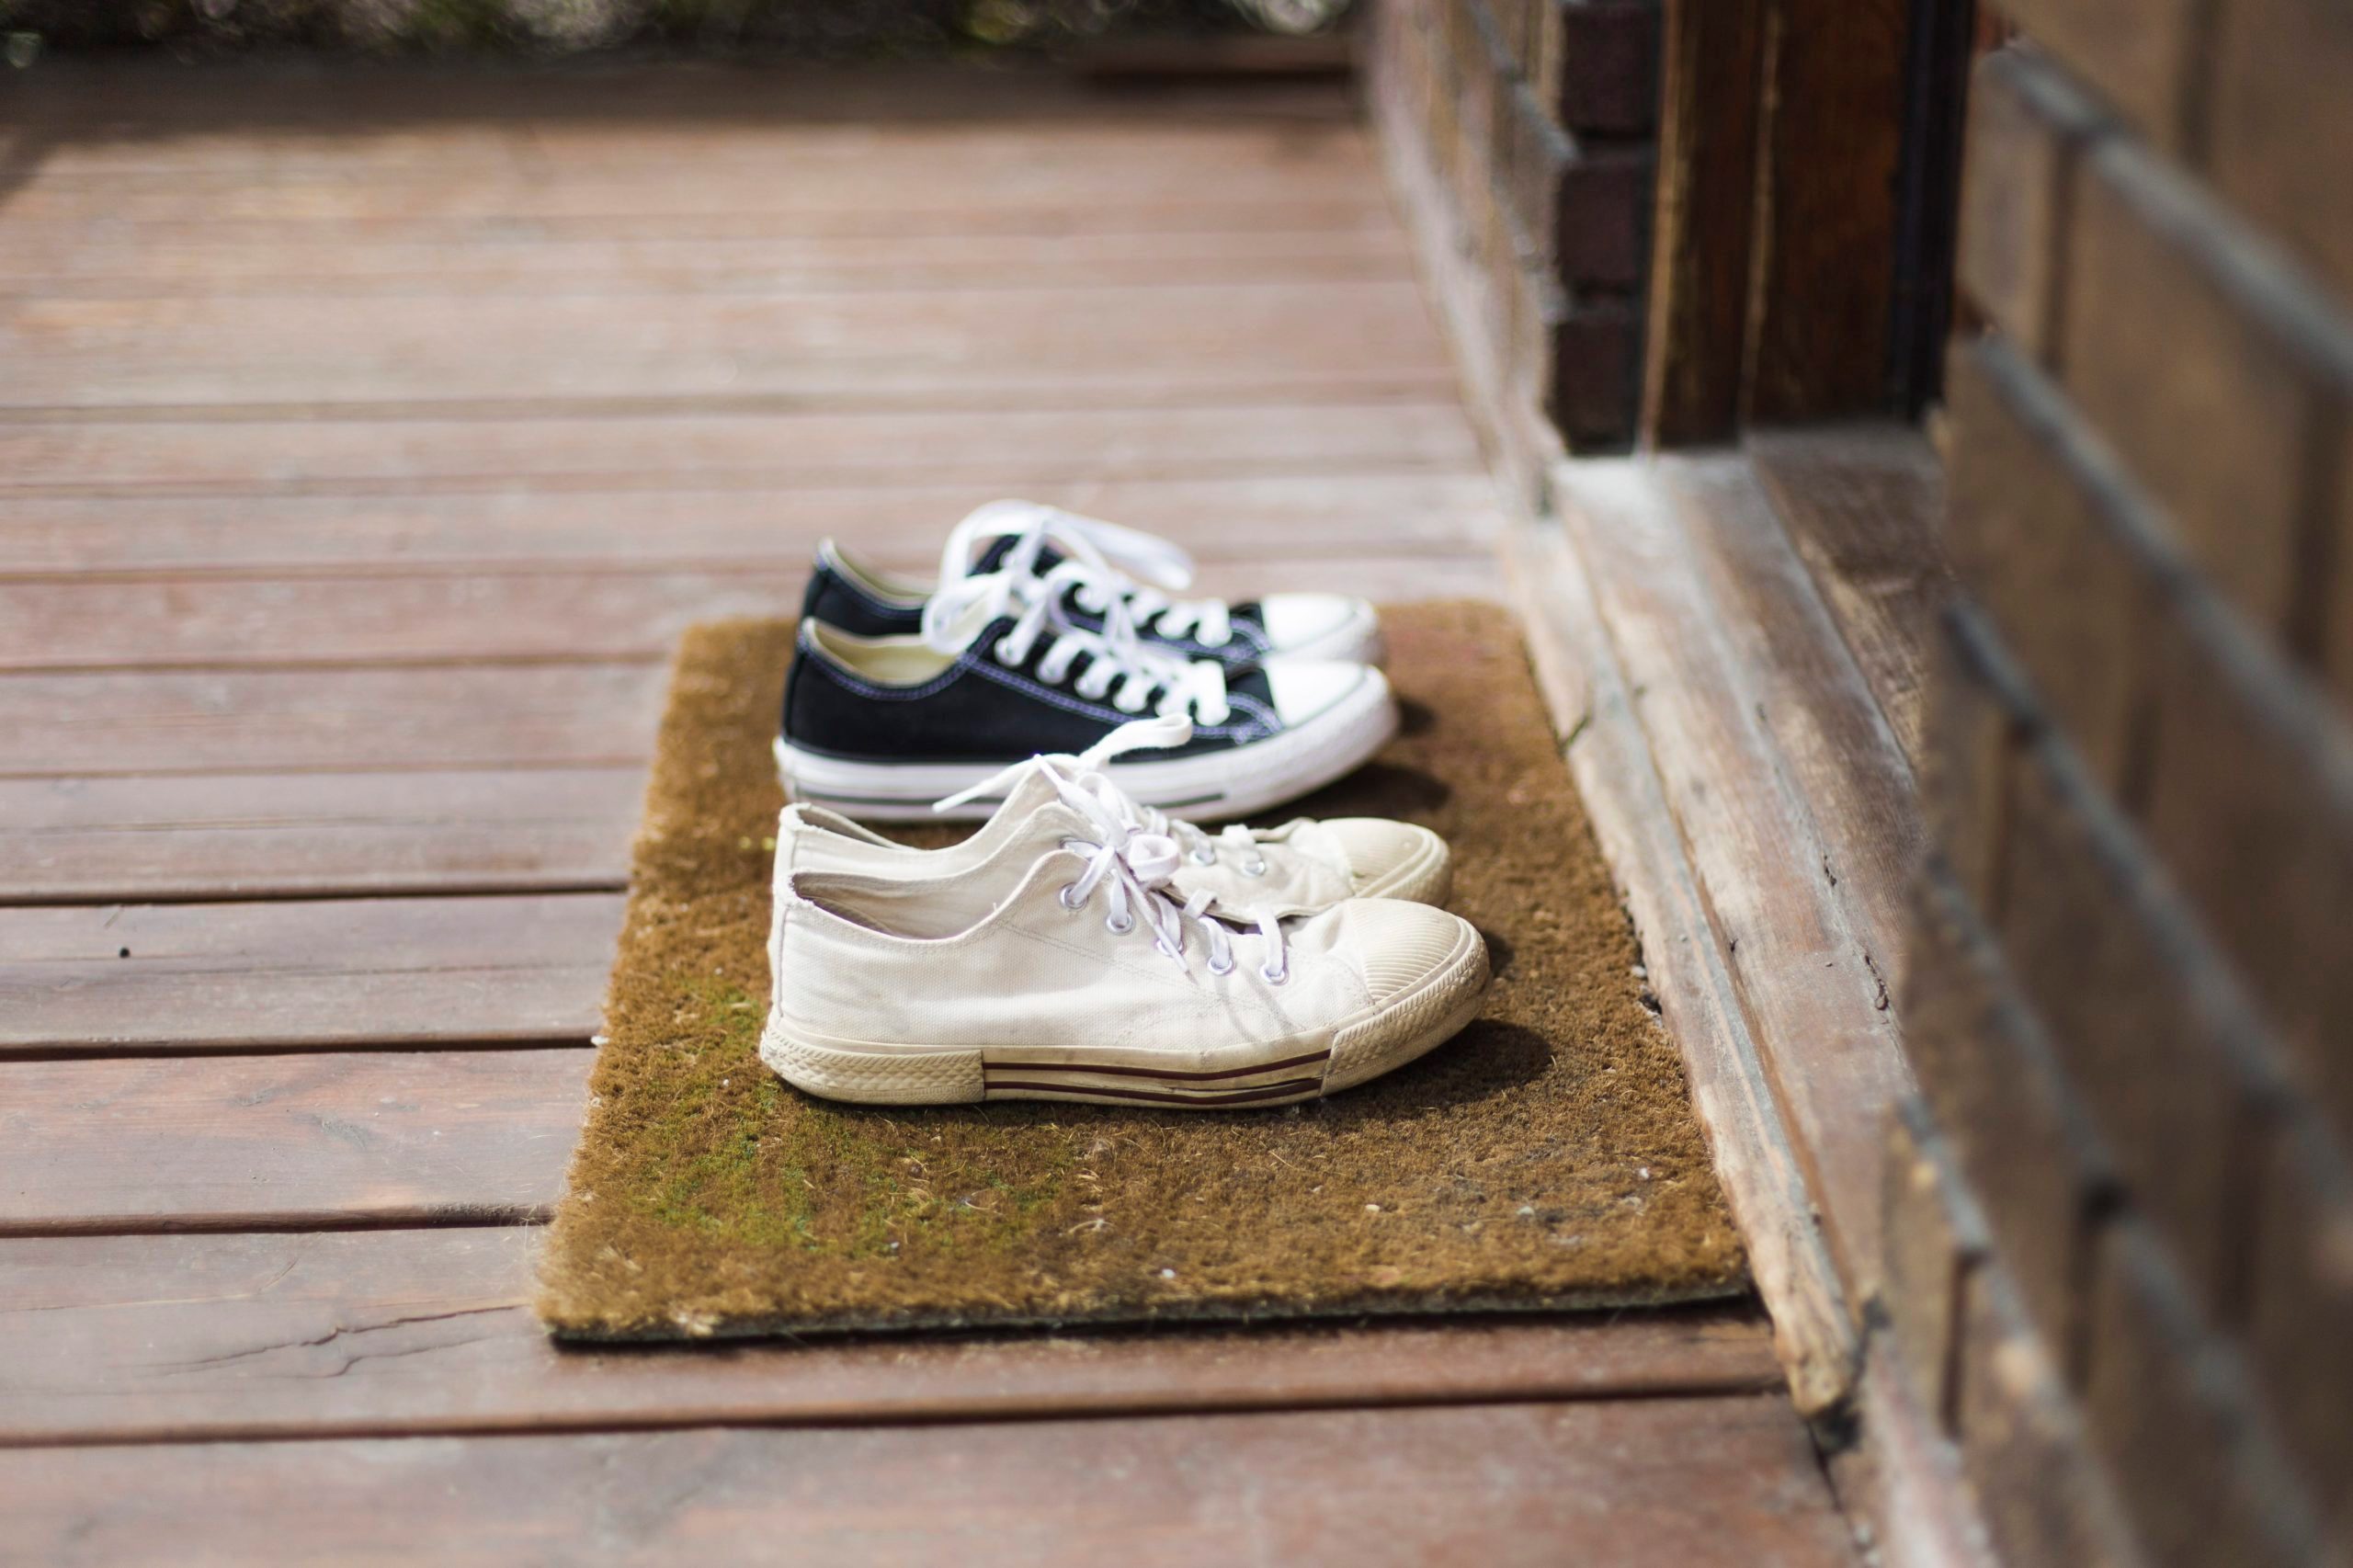 Two pairs of black and white sneakers shoes on a porch